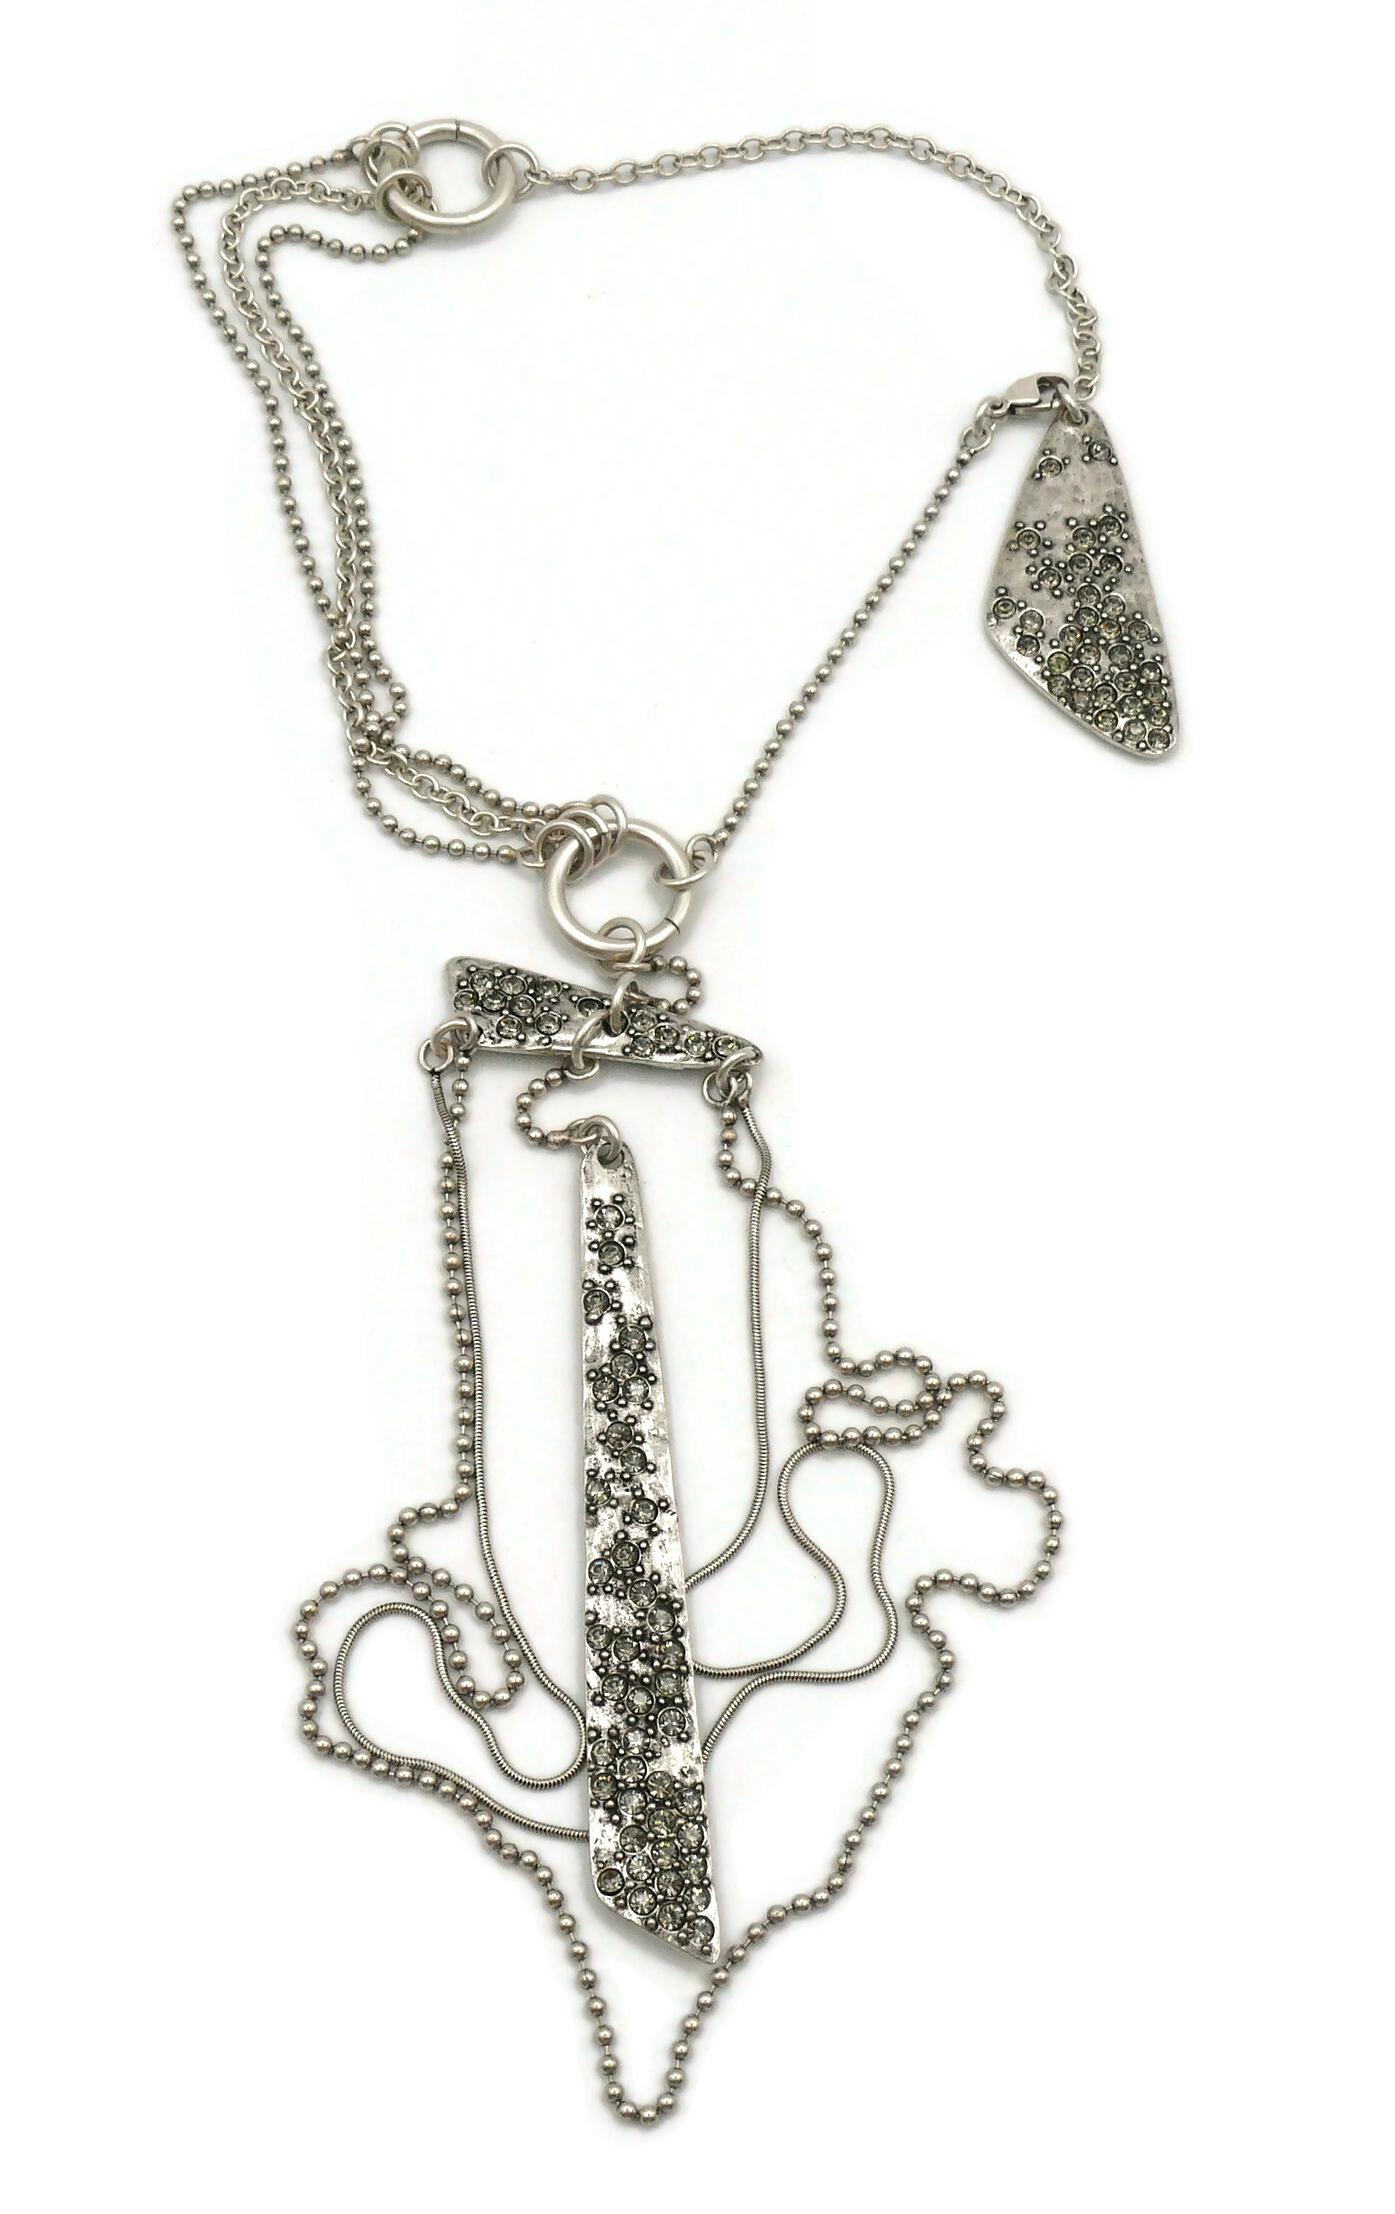 JEAN PAUL GAULTIER Mobile Pendant Necklace In Excellent Condition For Sale In Nice, FR